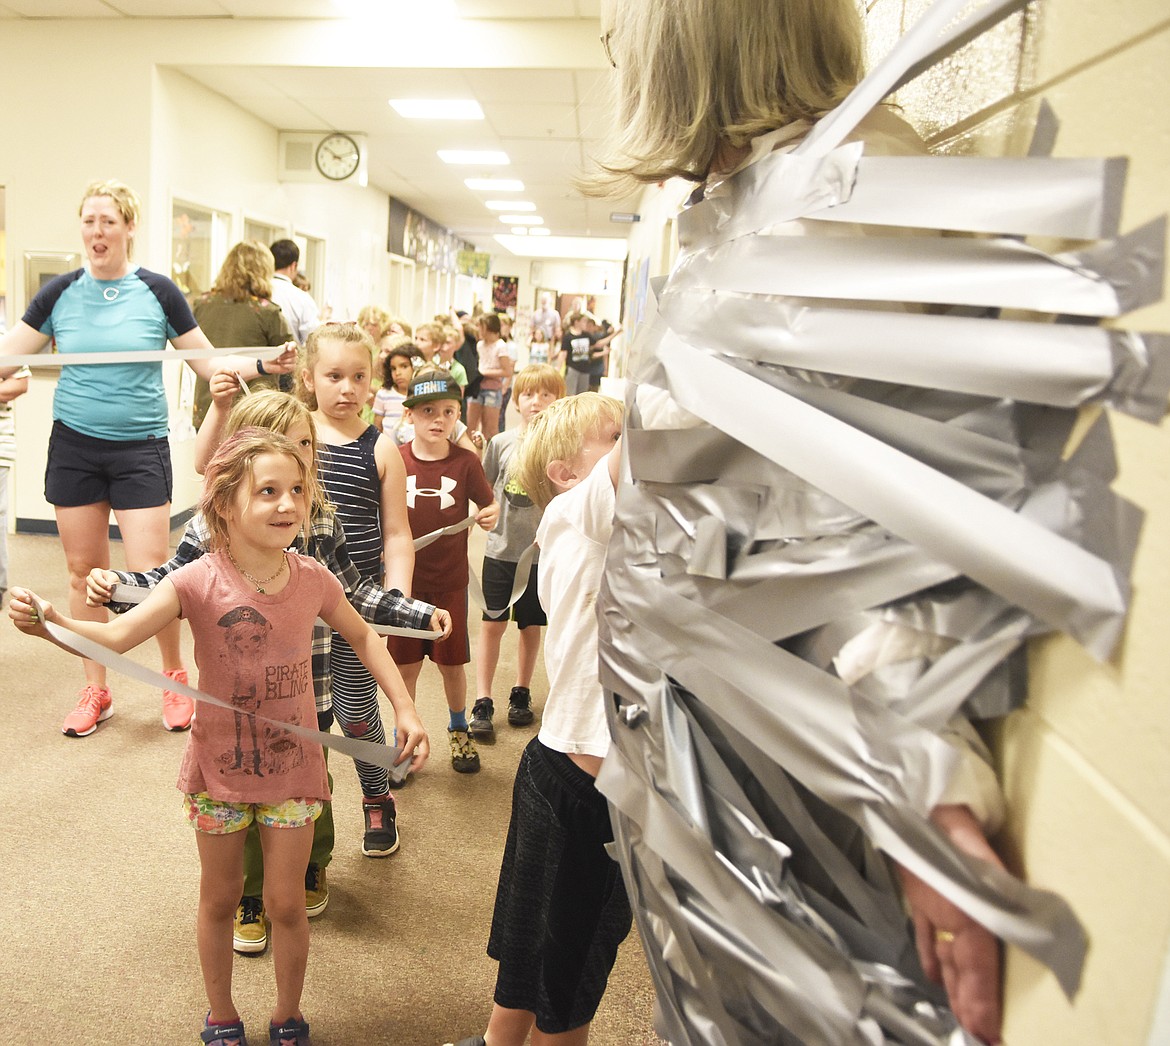 Muldown Elementary student Marley Barge, in pink, smiles while getting ready to put duct tape on Principal Linda Whitright Wednesday morning at the school. (Heidi Desch/Whitefish Pilot)